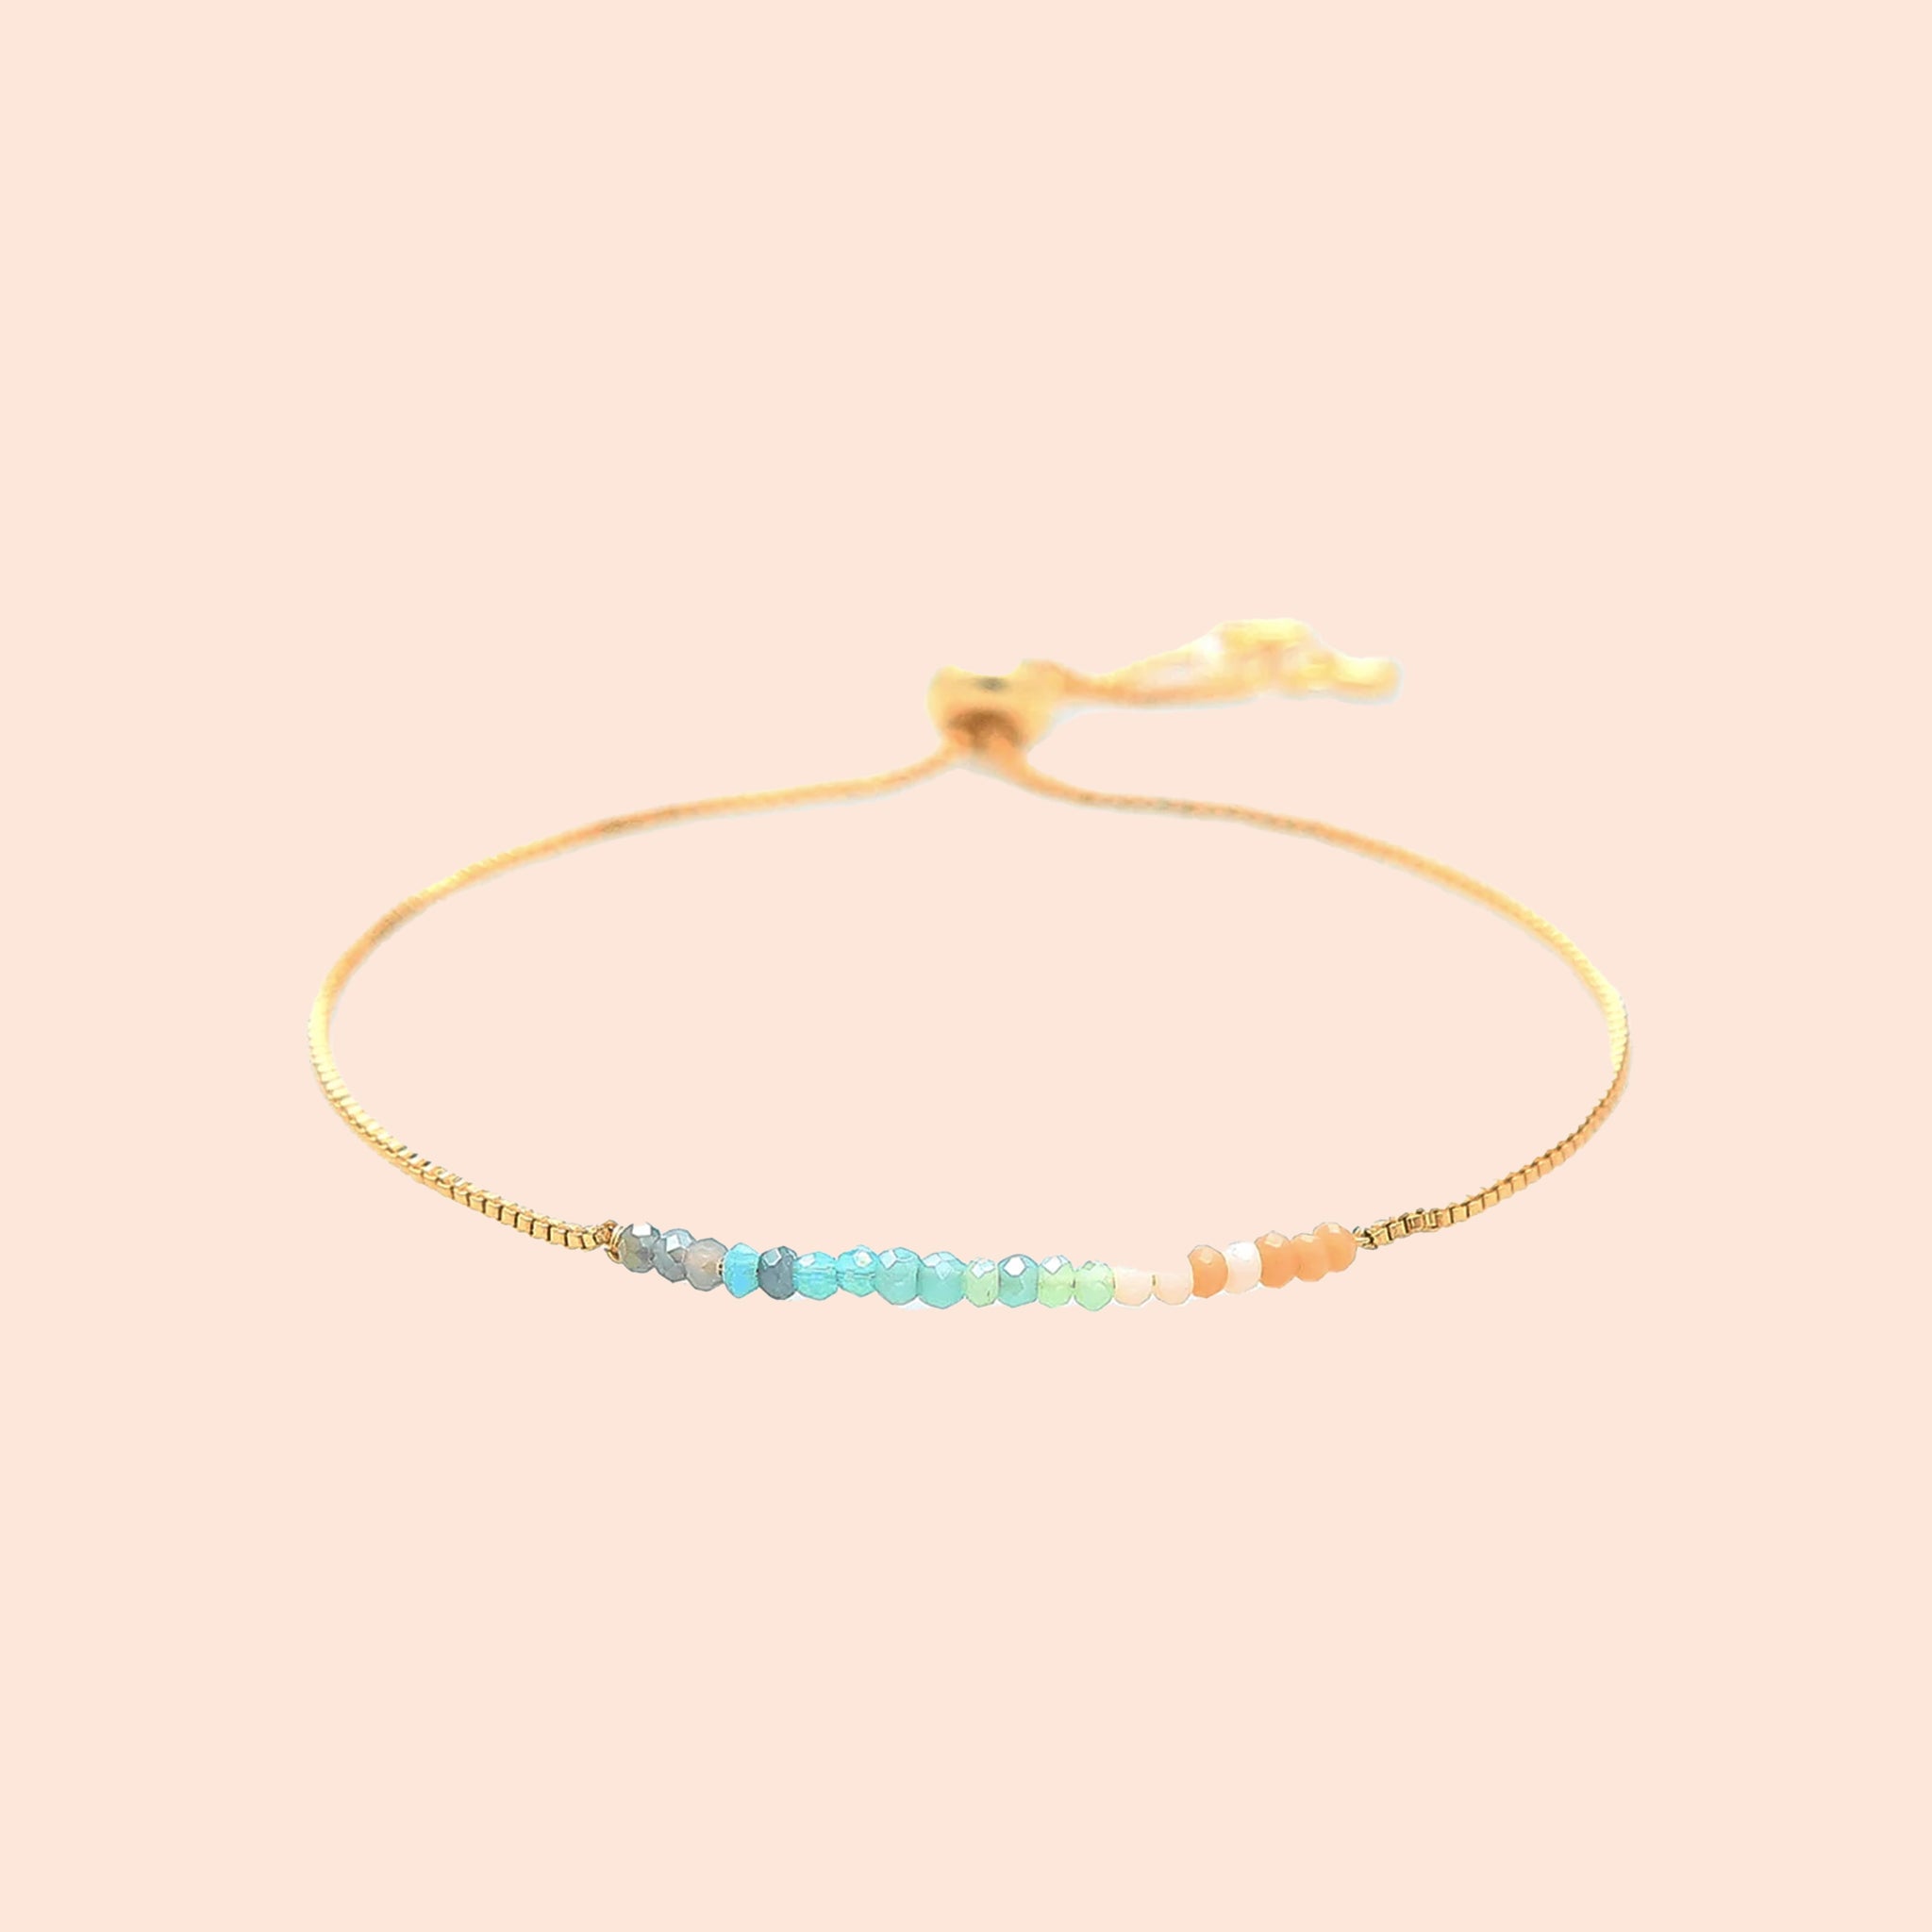 A gold bracelet with multicolored beads. 